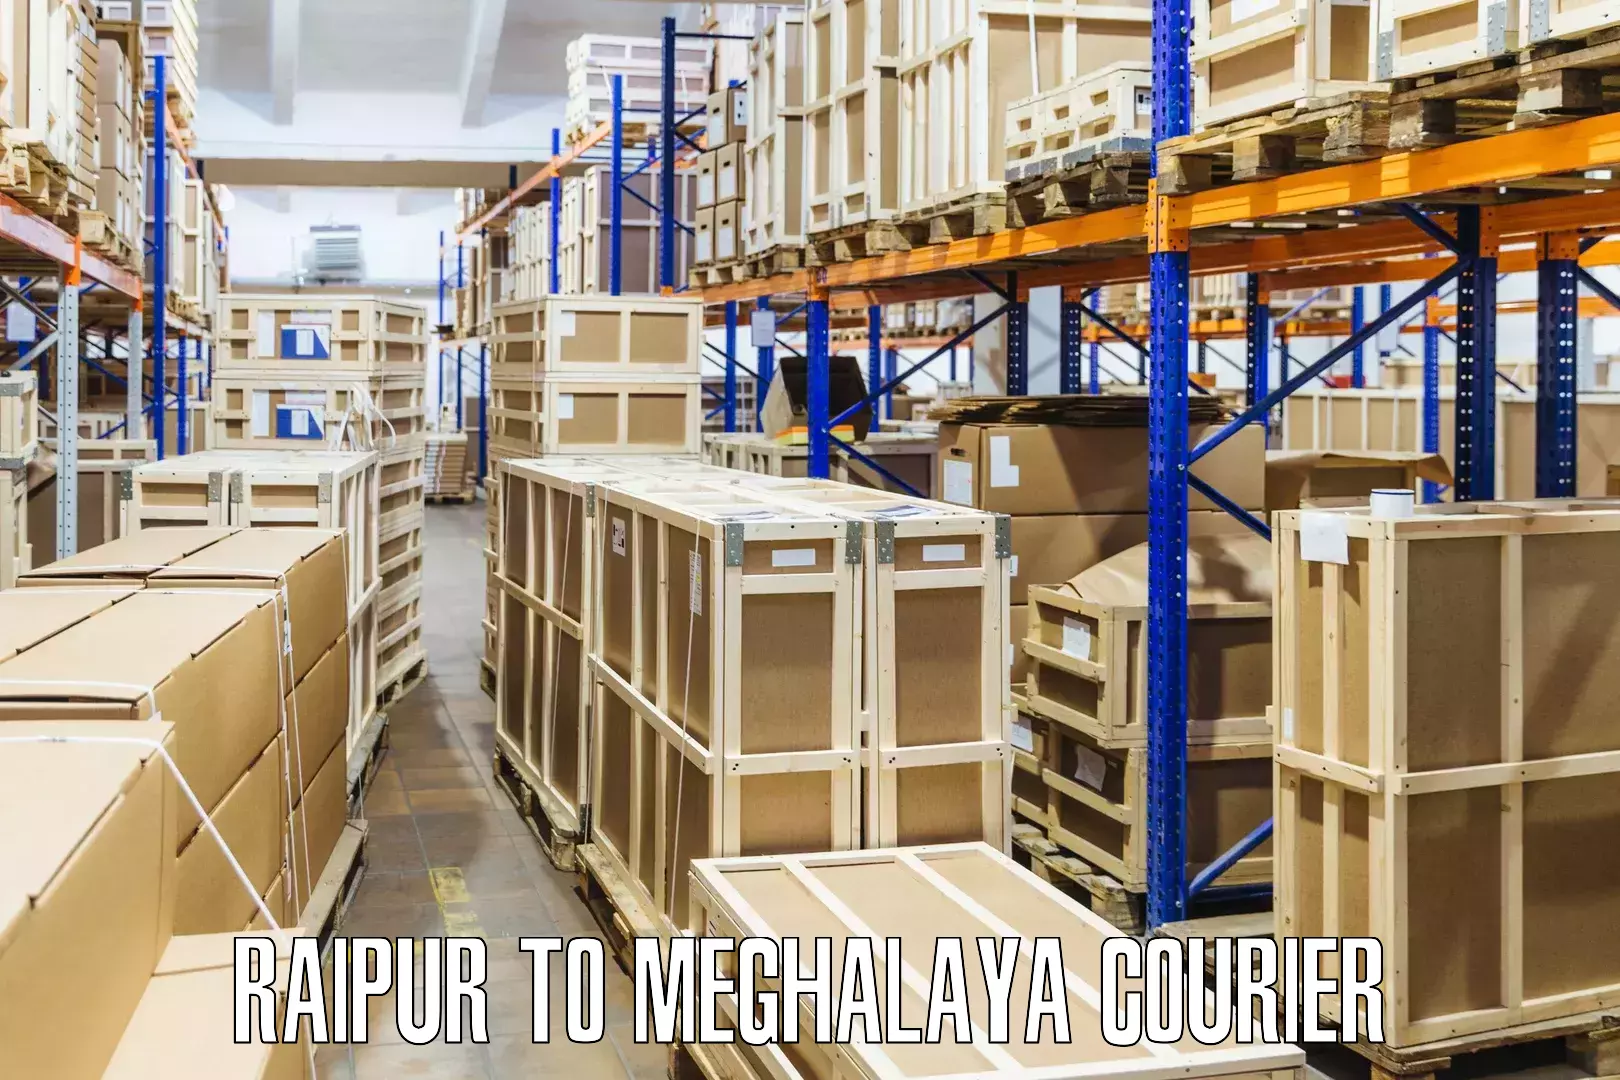 Express package delivery Raipur to Meghalaya